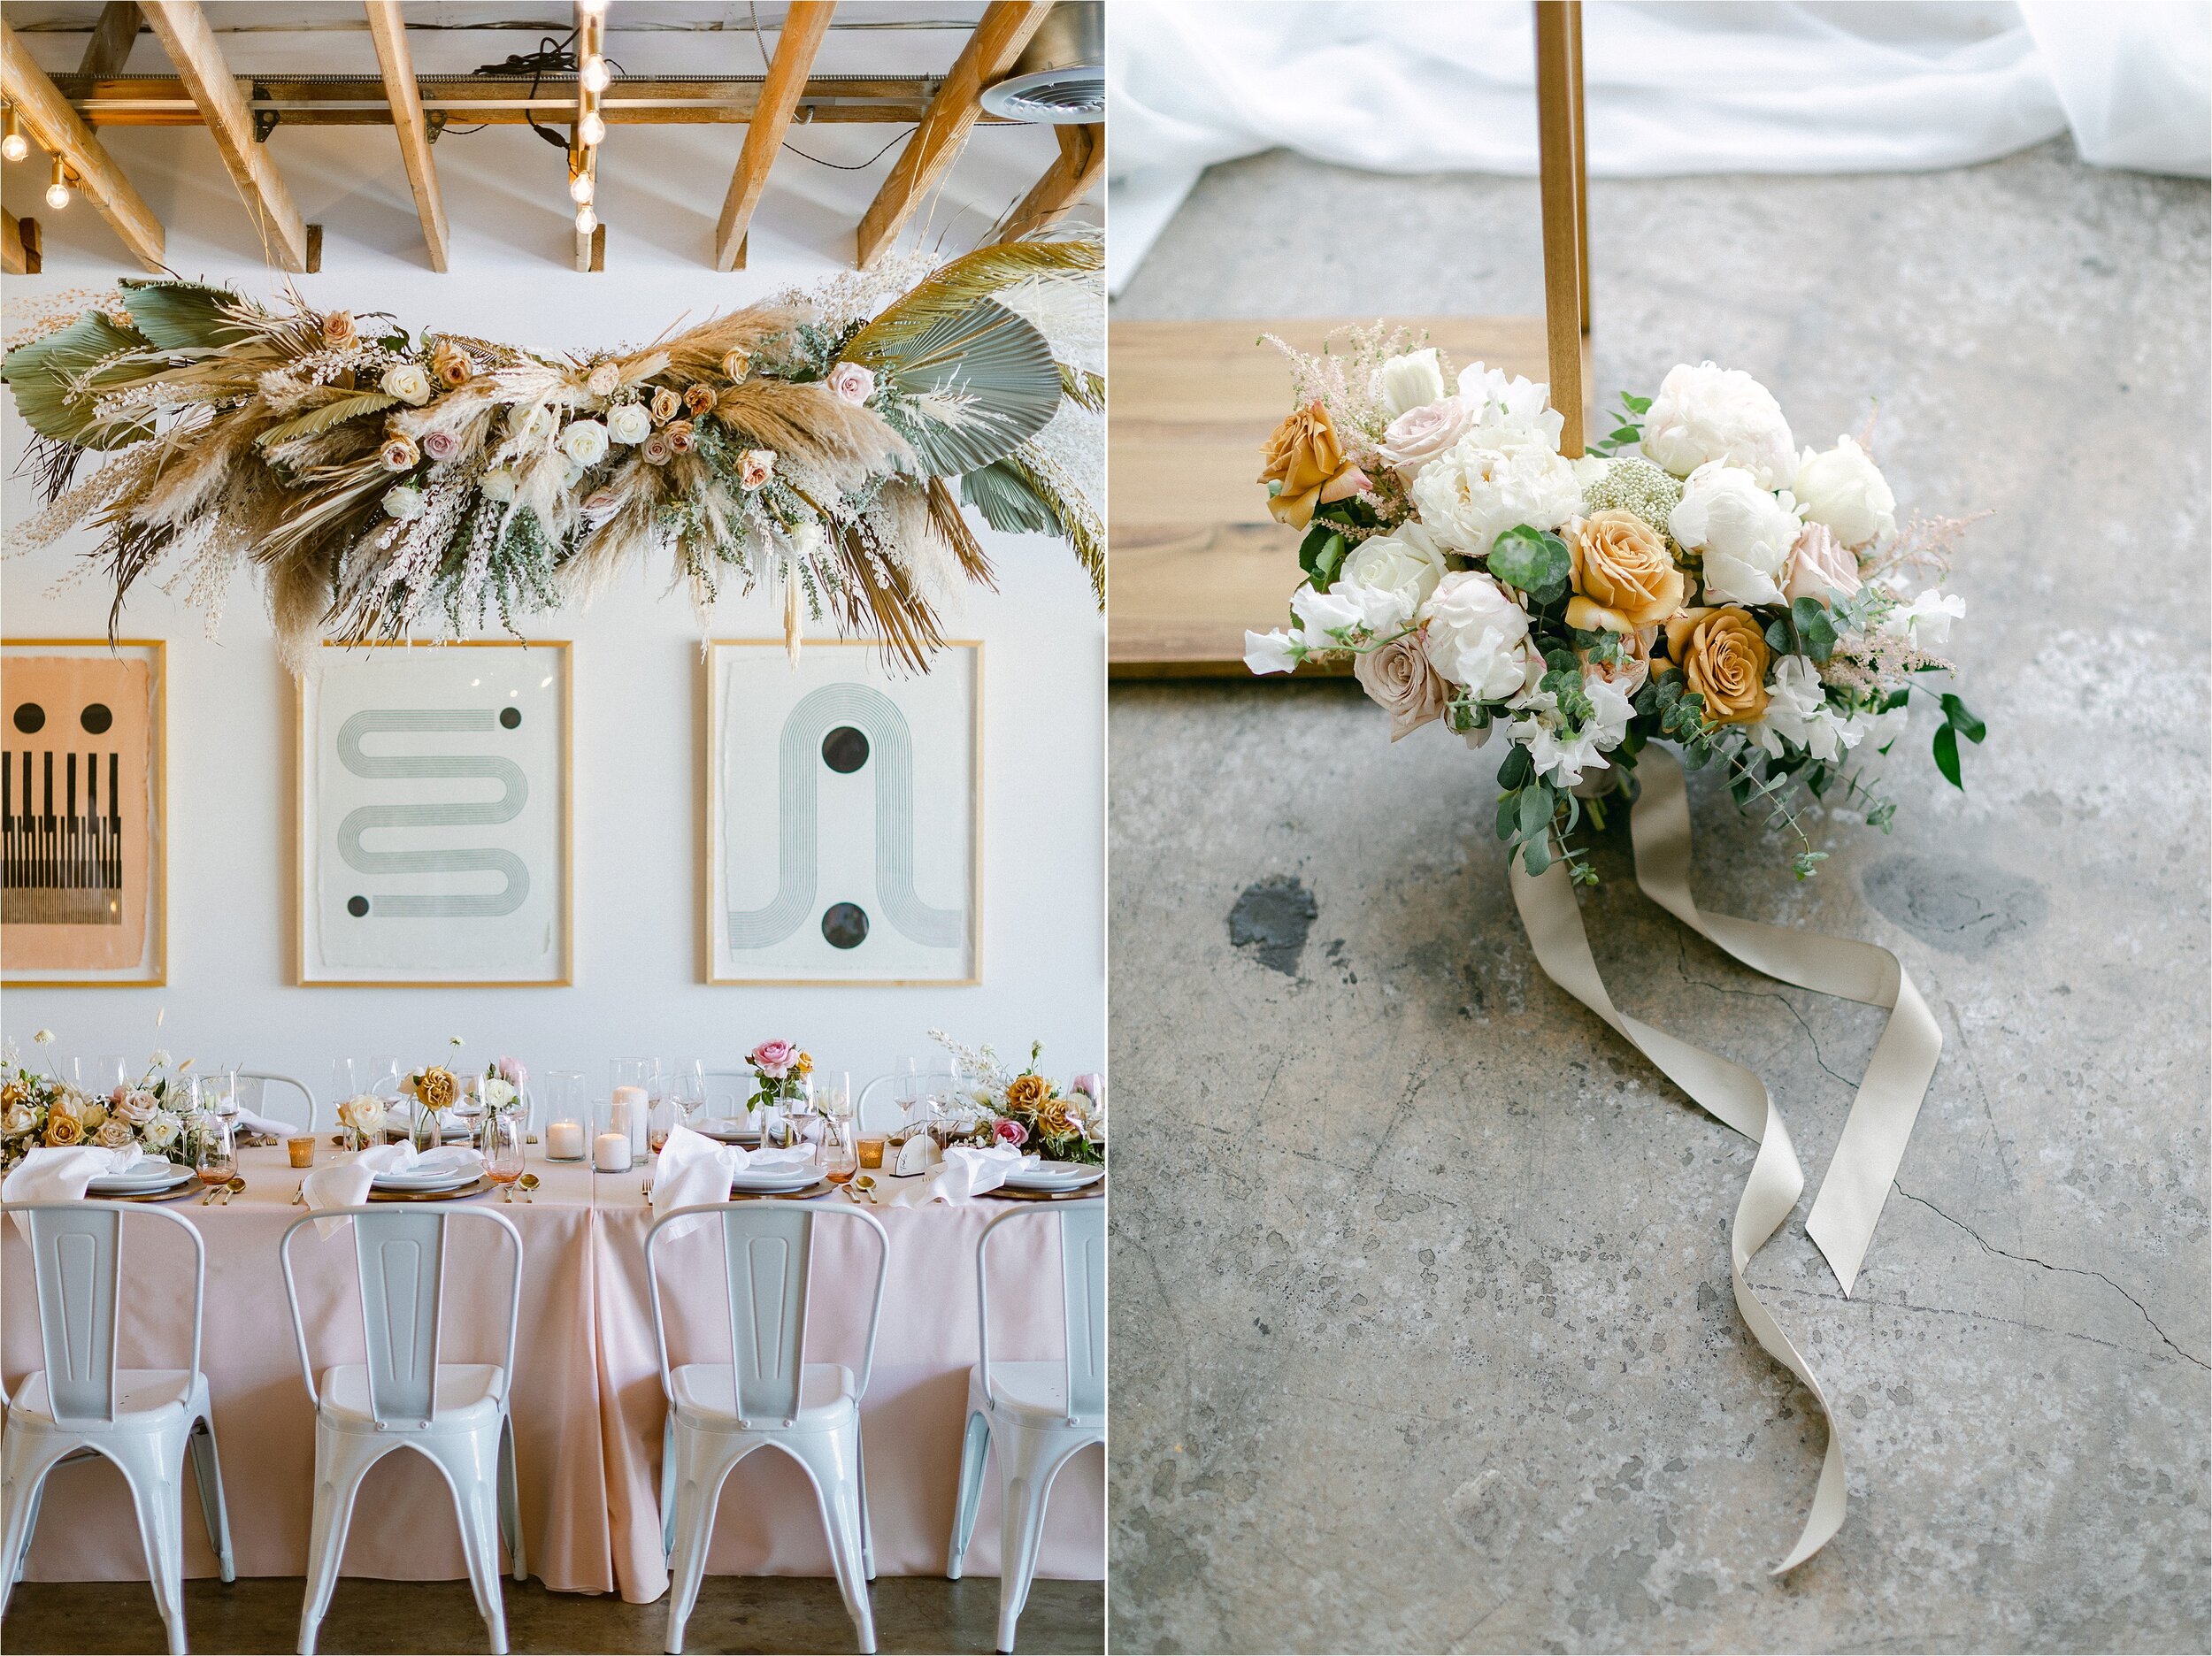 Neutral toned bouquet and tablescape at micro wedding